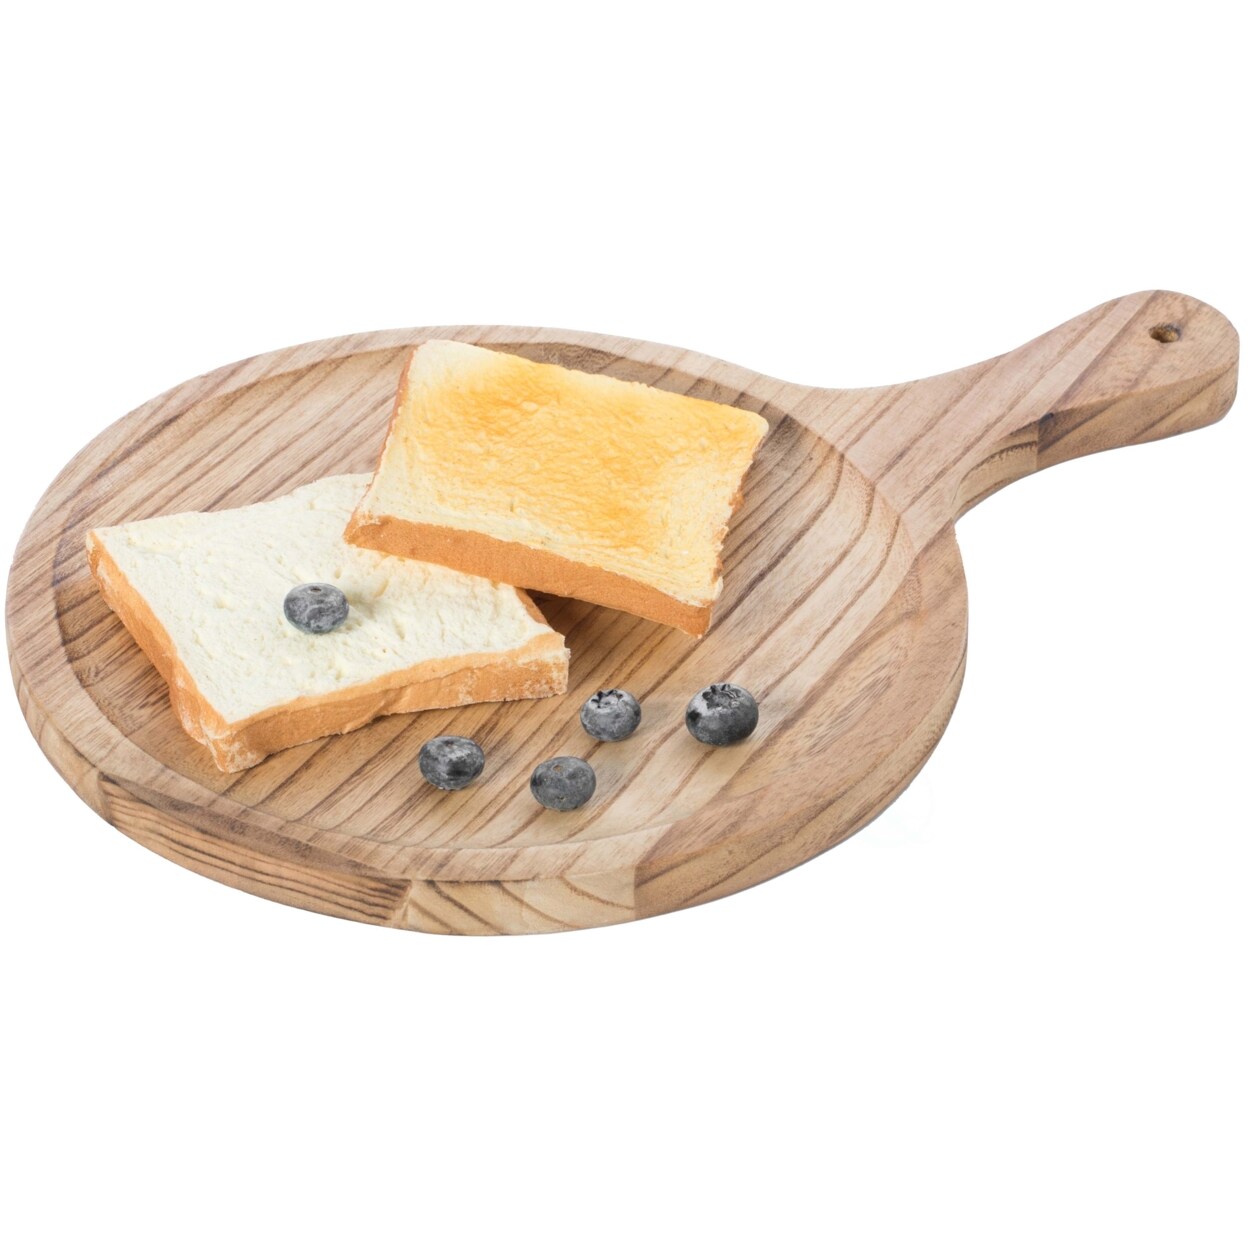 Vintiquewise Wooden Round Shape Serving Tray Display Platter